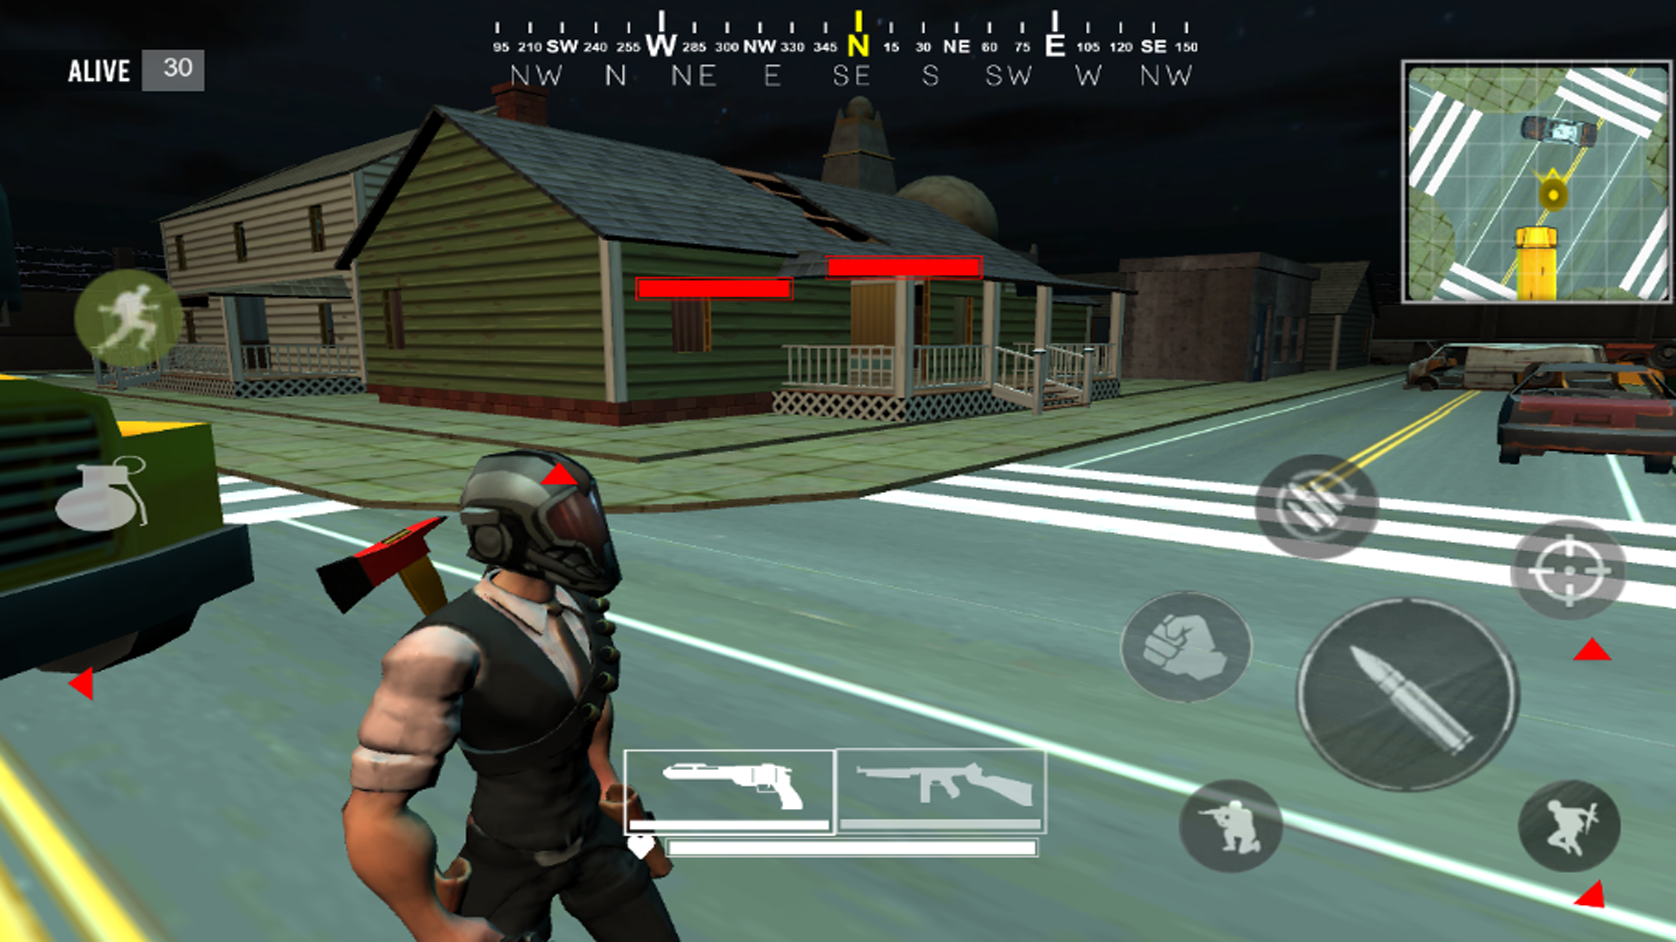 free fire 3 survival battleground battle royale for Android ... - 